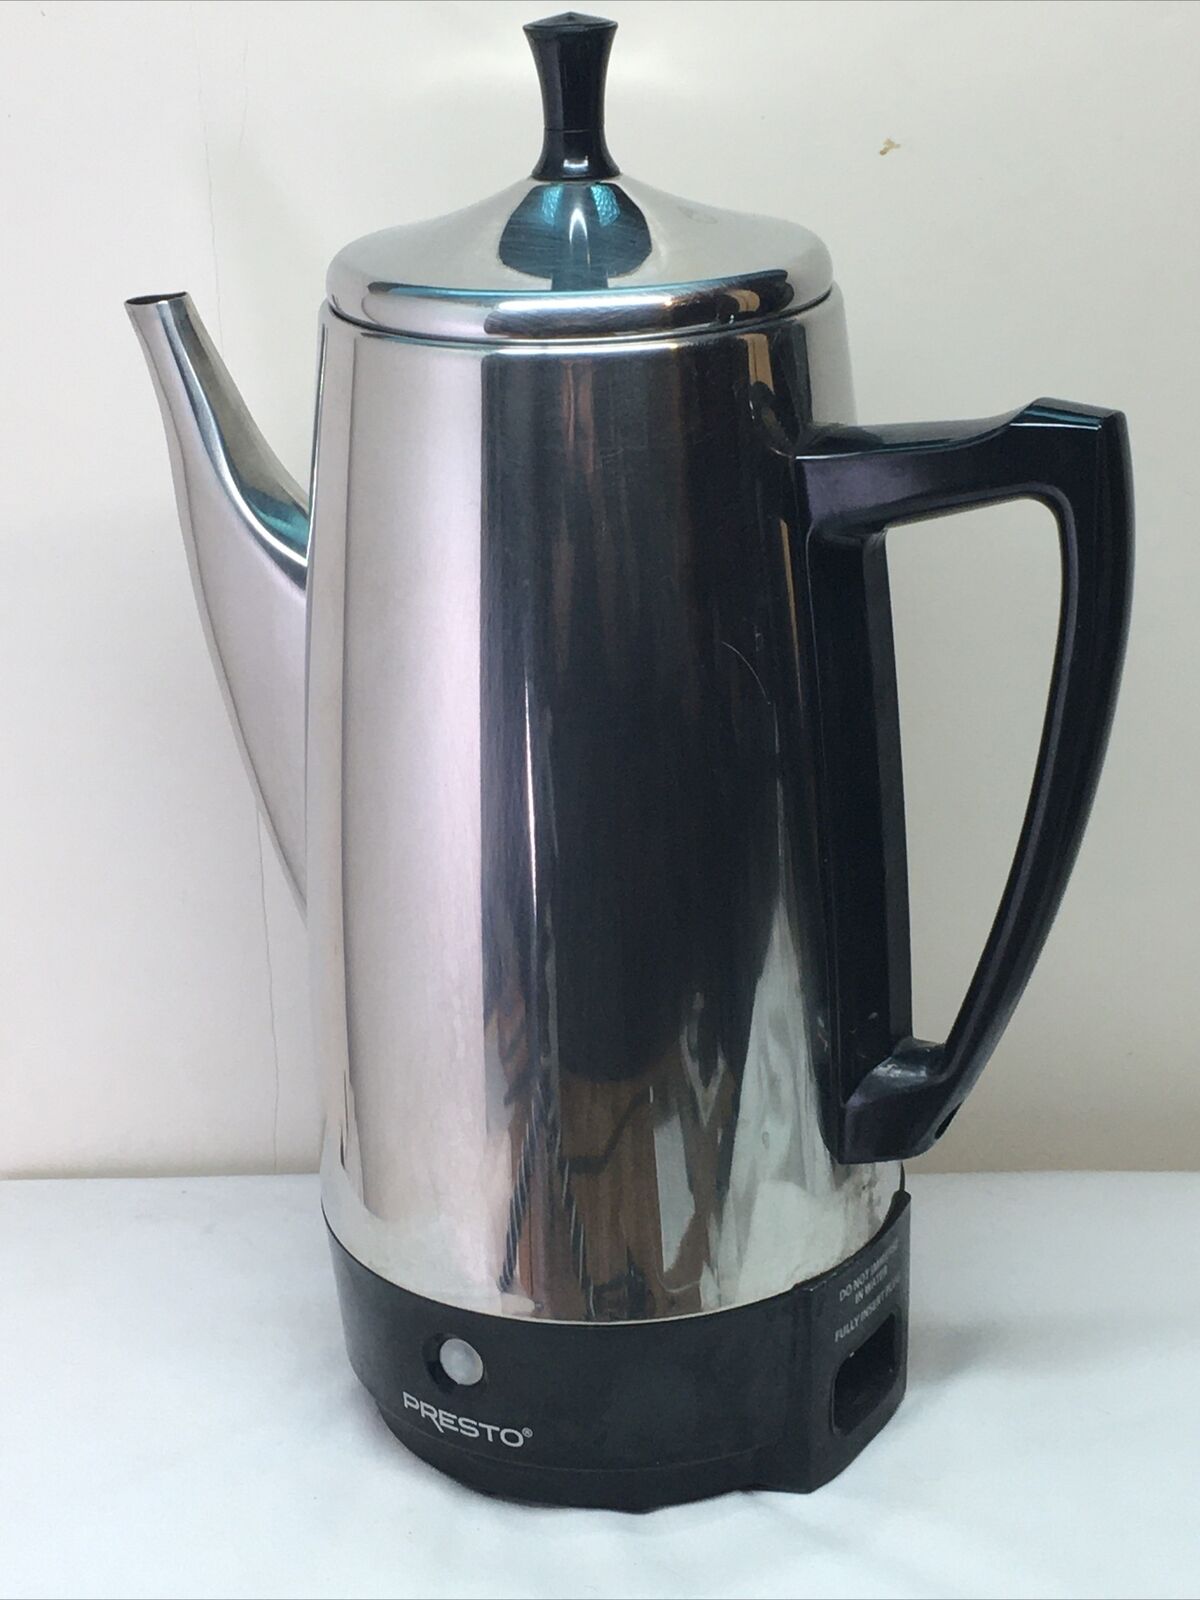 PRESTO Stainless Steel 12 Cup Electric Percolator Coffee Pot #0281105.